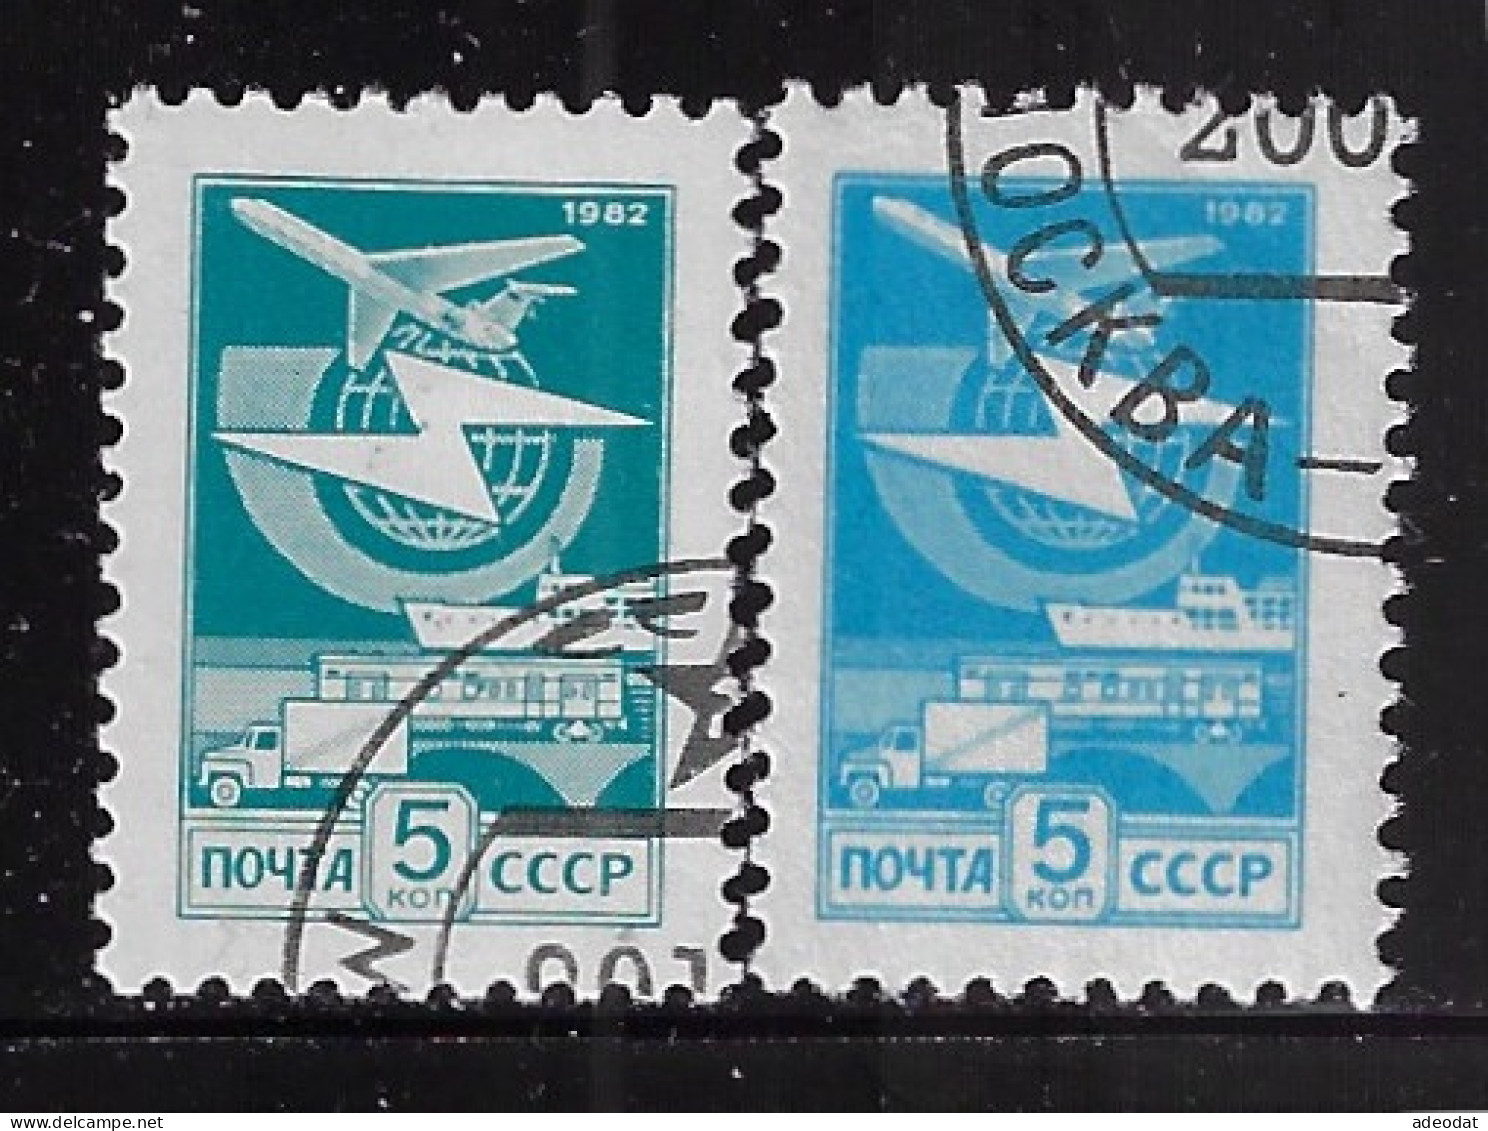 RUSSIA 1982-83  SCOTT #5112,5113 USED - Used Stamps